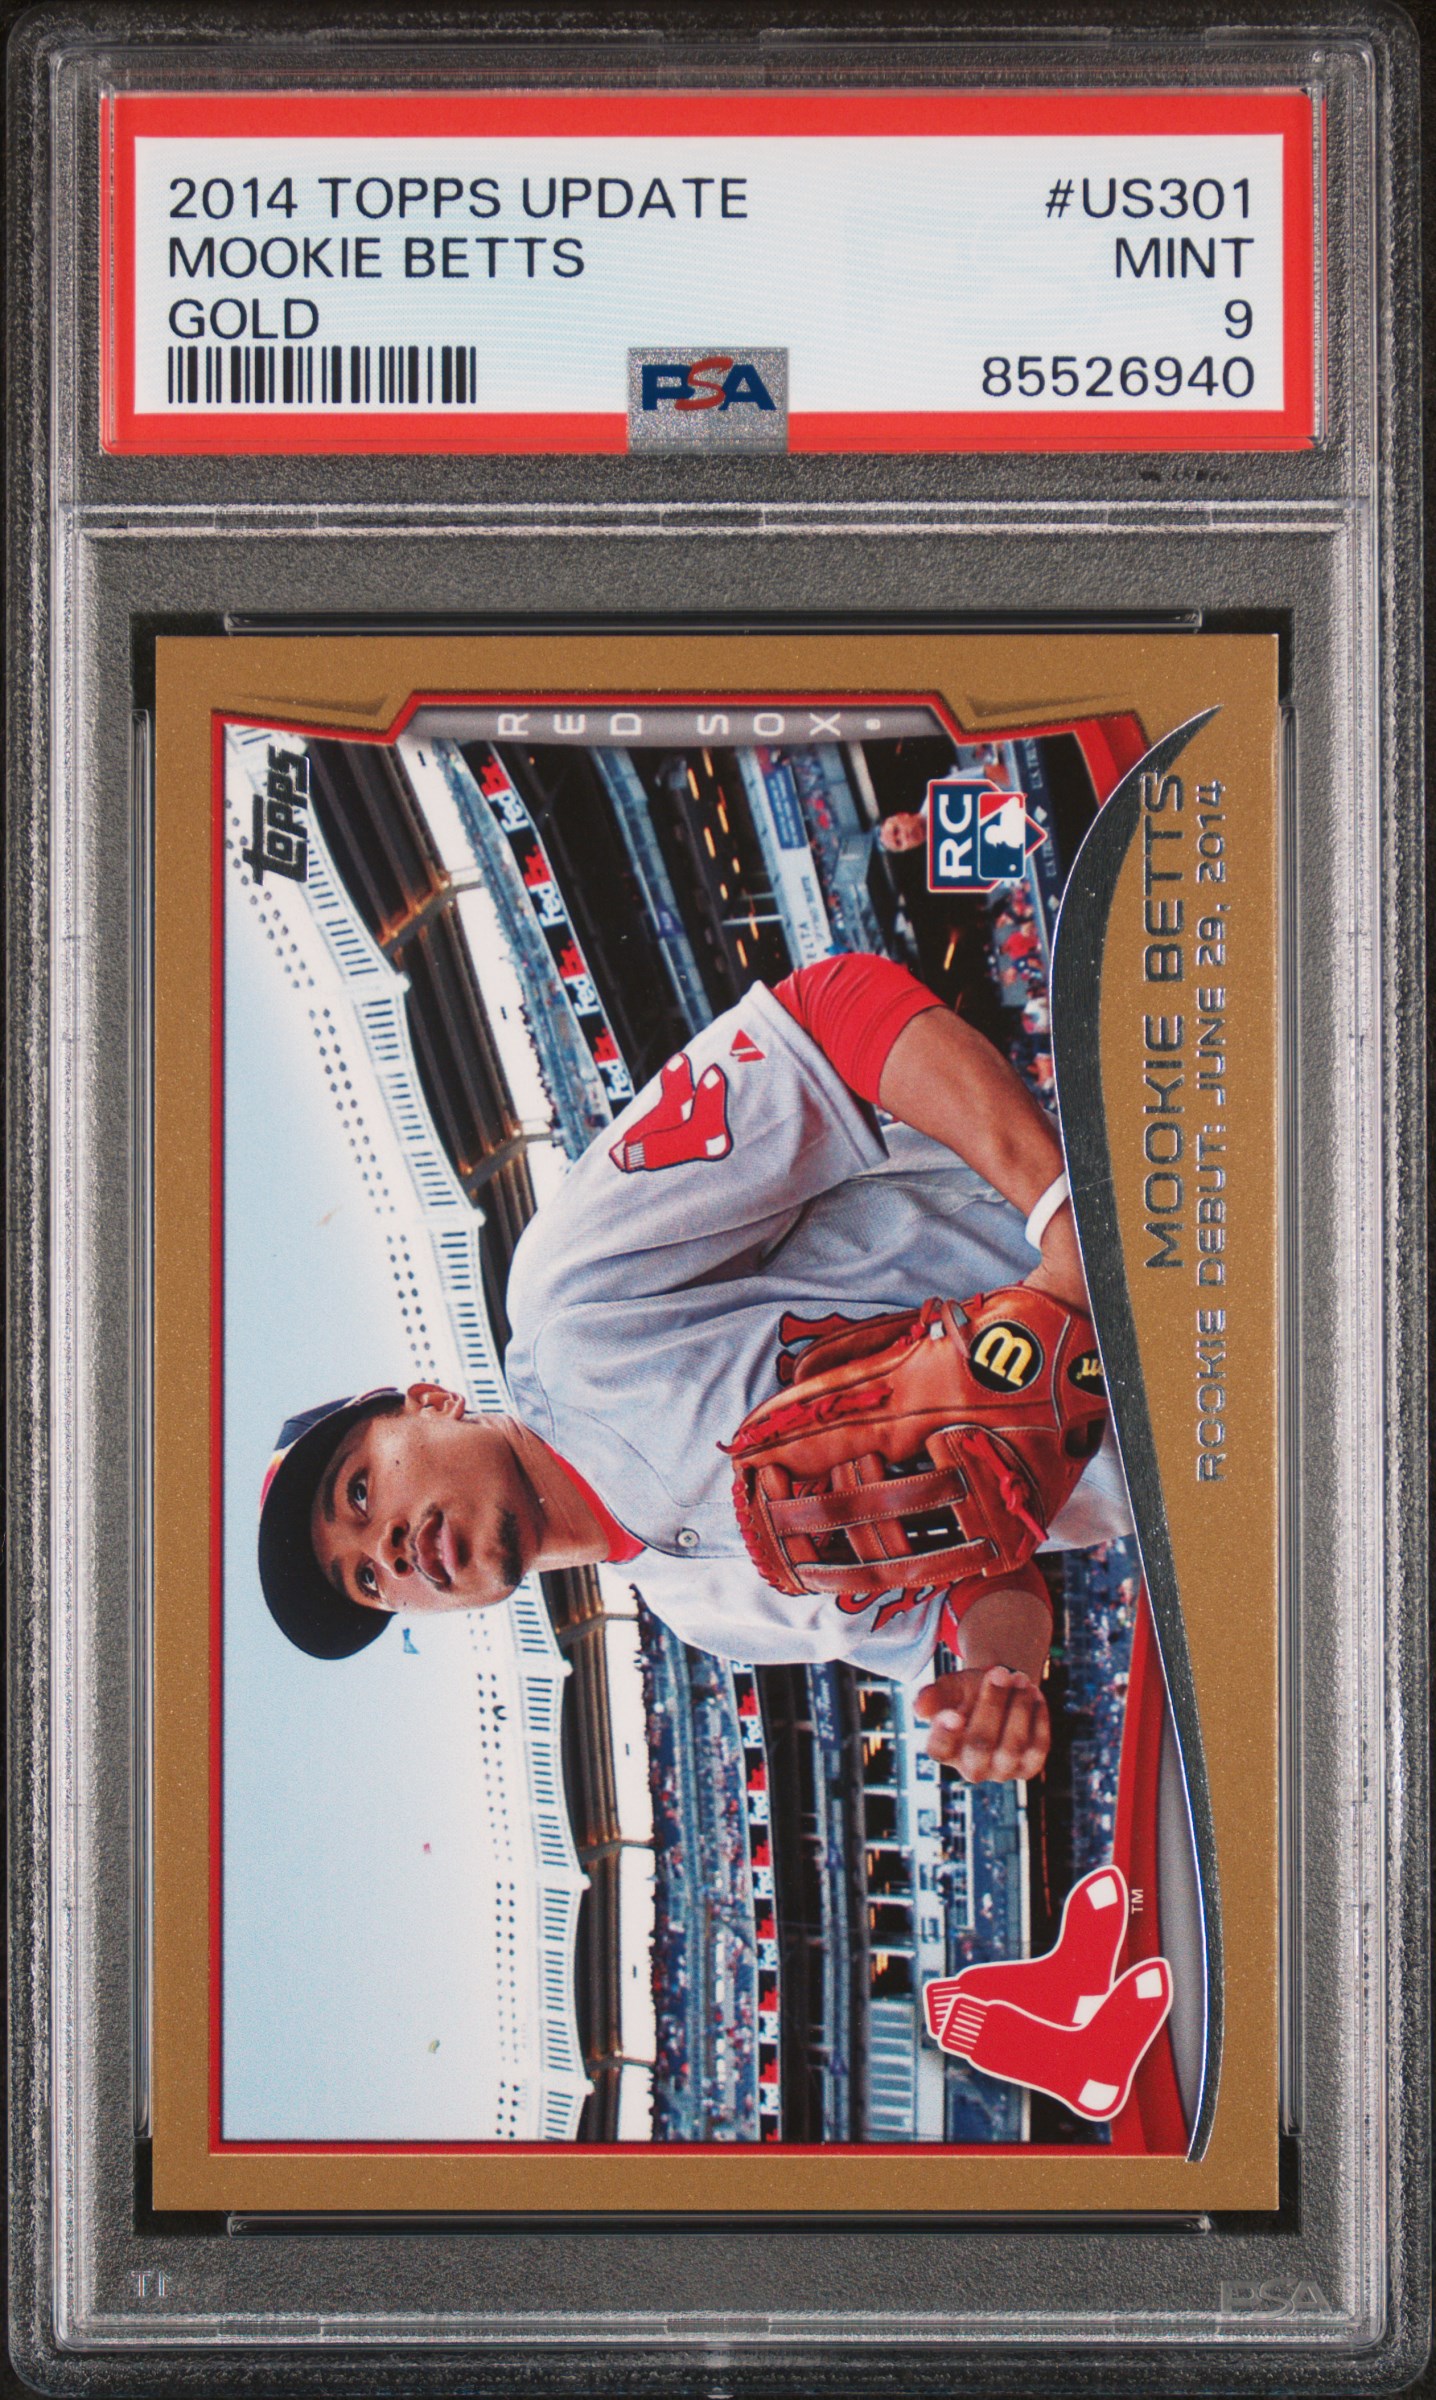 2014 Topps Update Gold #US301 Mookie Betts Rookie Card (#2000/2014) – PSA MINT 9